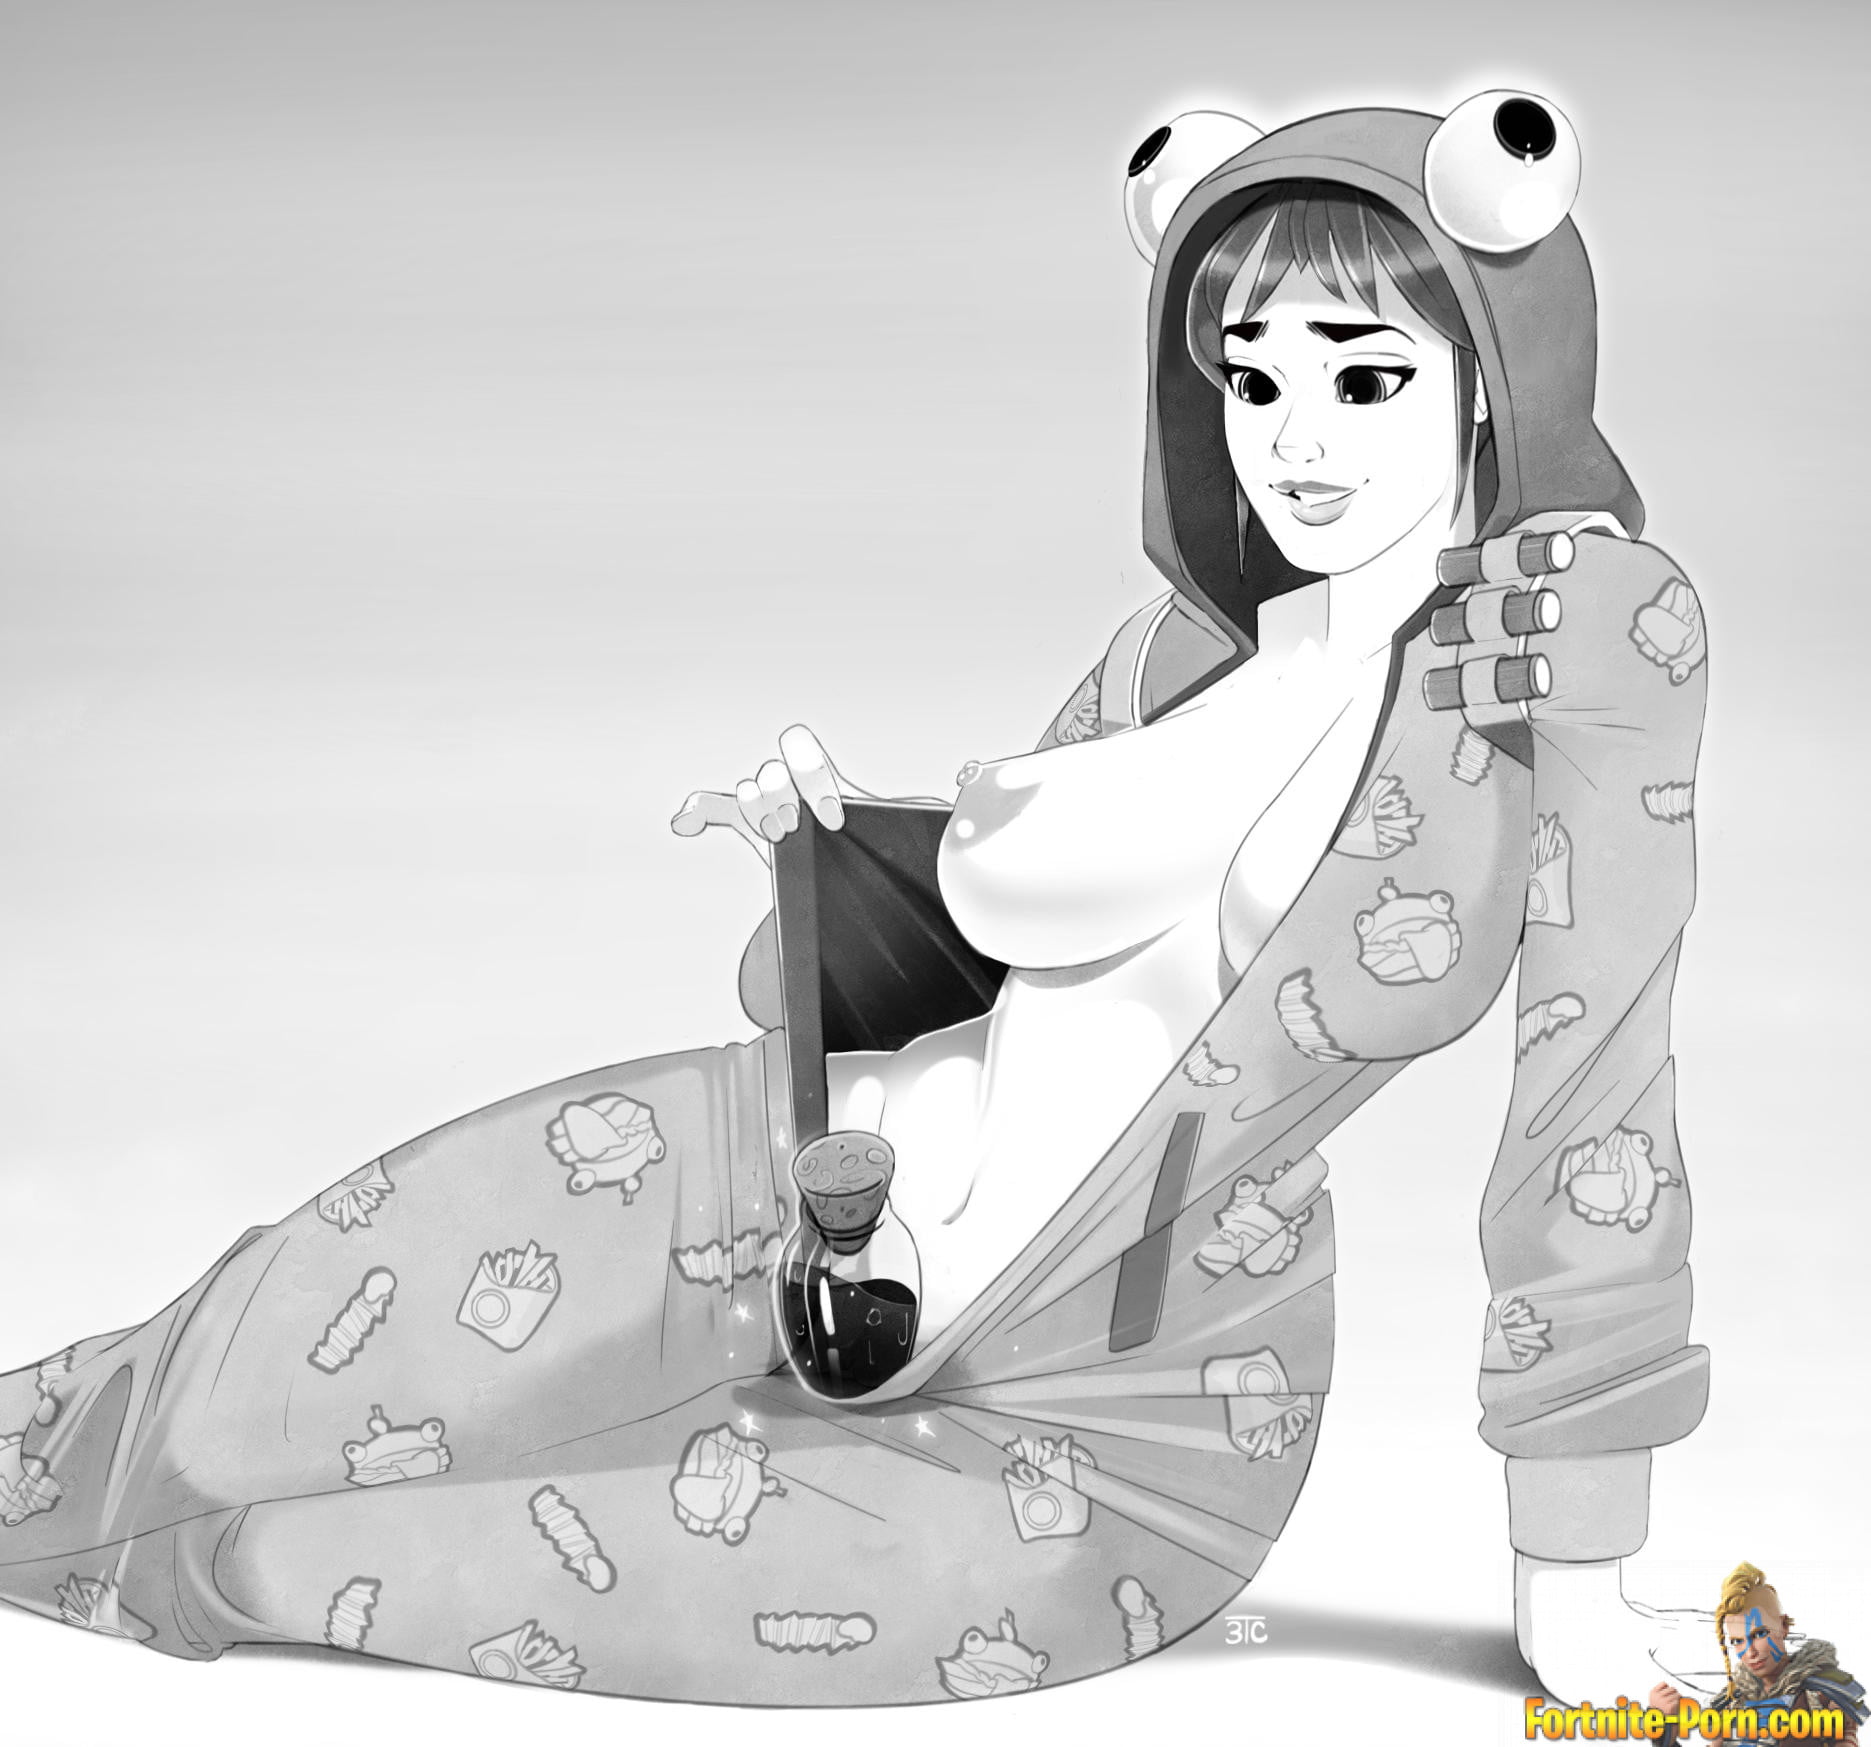 Fortnite onesie hentai - 🧡 Fortnite Onesie Hentai posted by Christopher A....